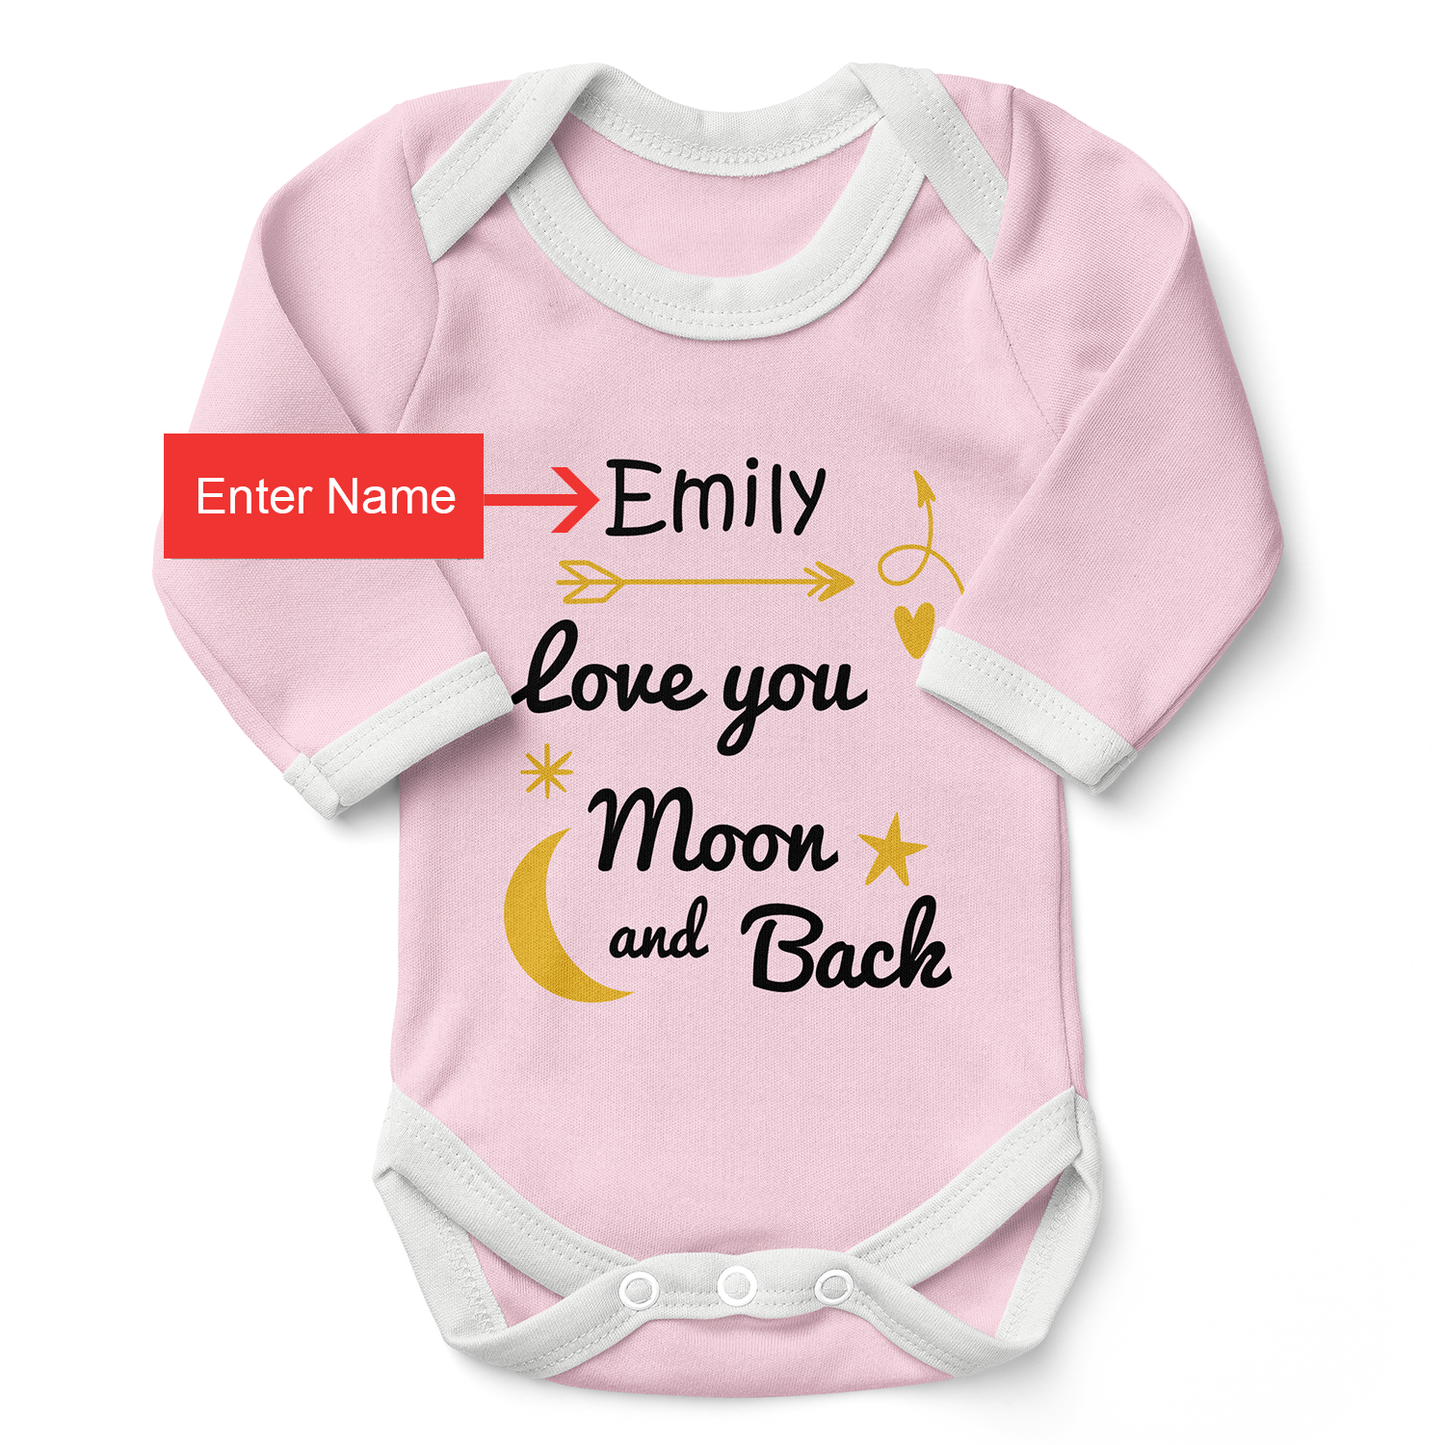 Personalized Organic Baby Bodysuit - Love You To The Moon & Back (Pink)